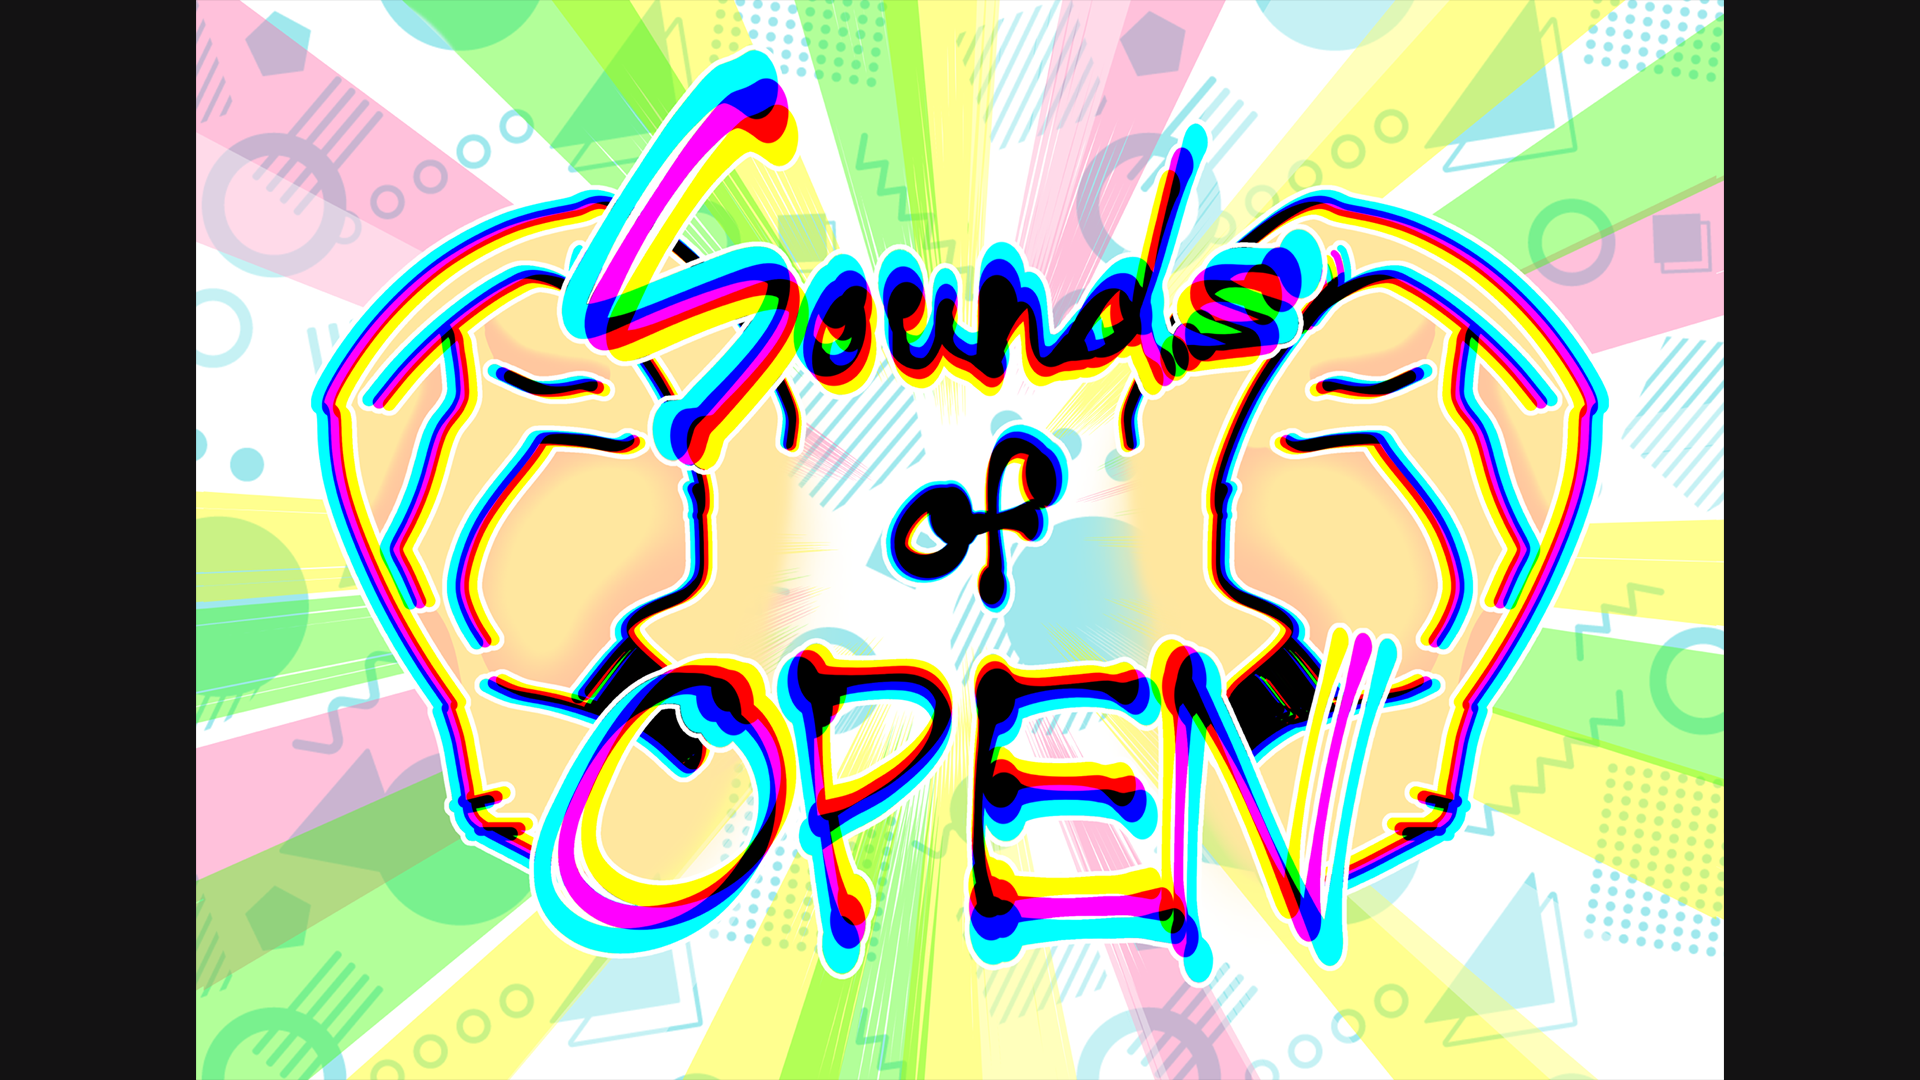 Sounds of OPEN